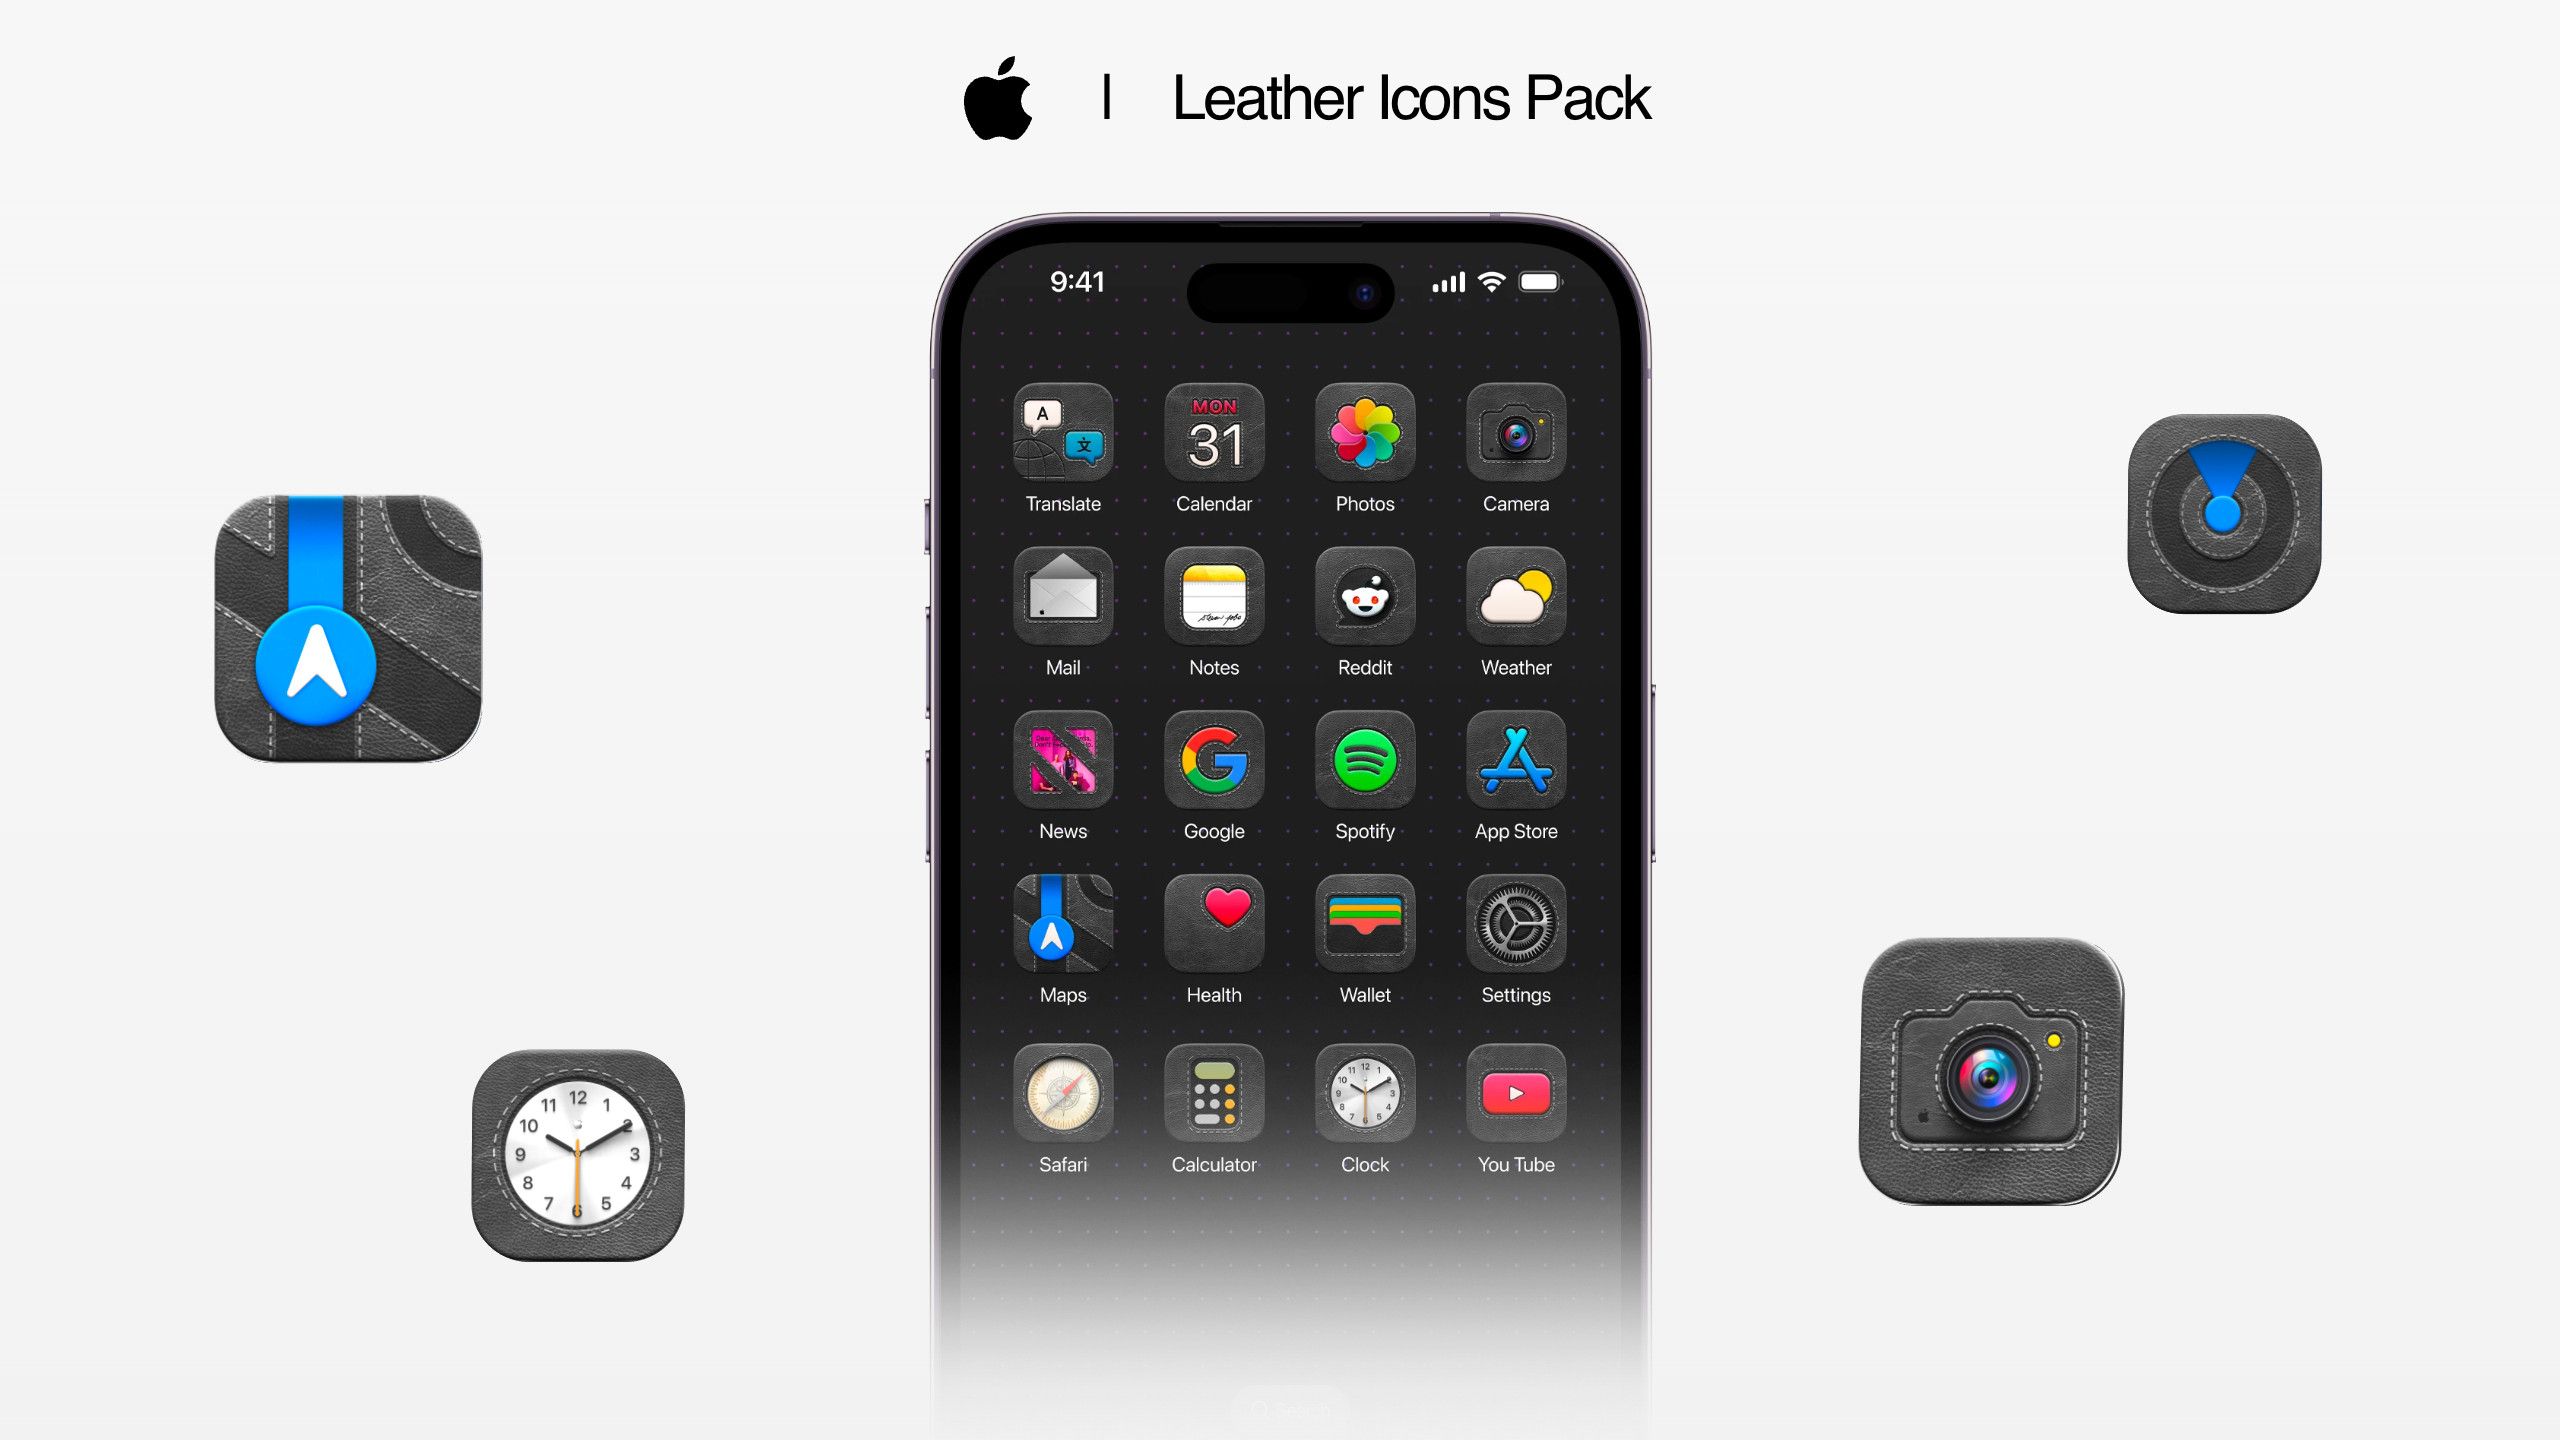 Leather Icons Pack by Attiq R. visual